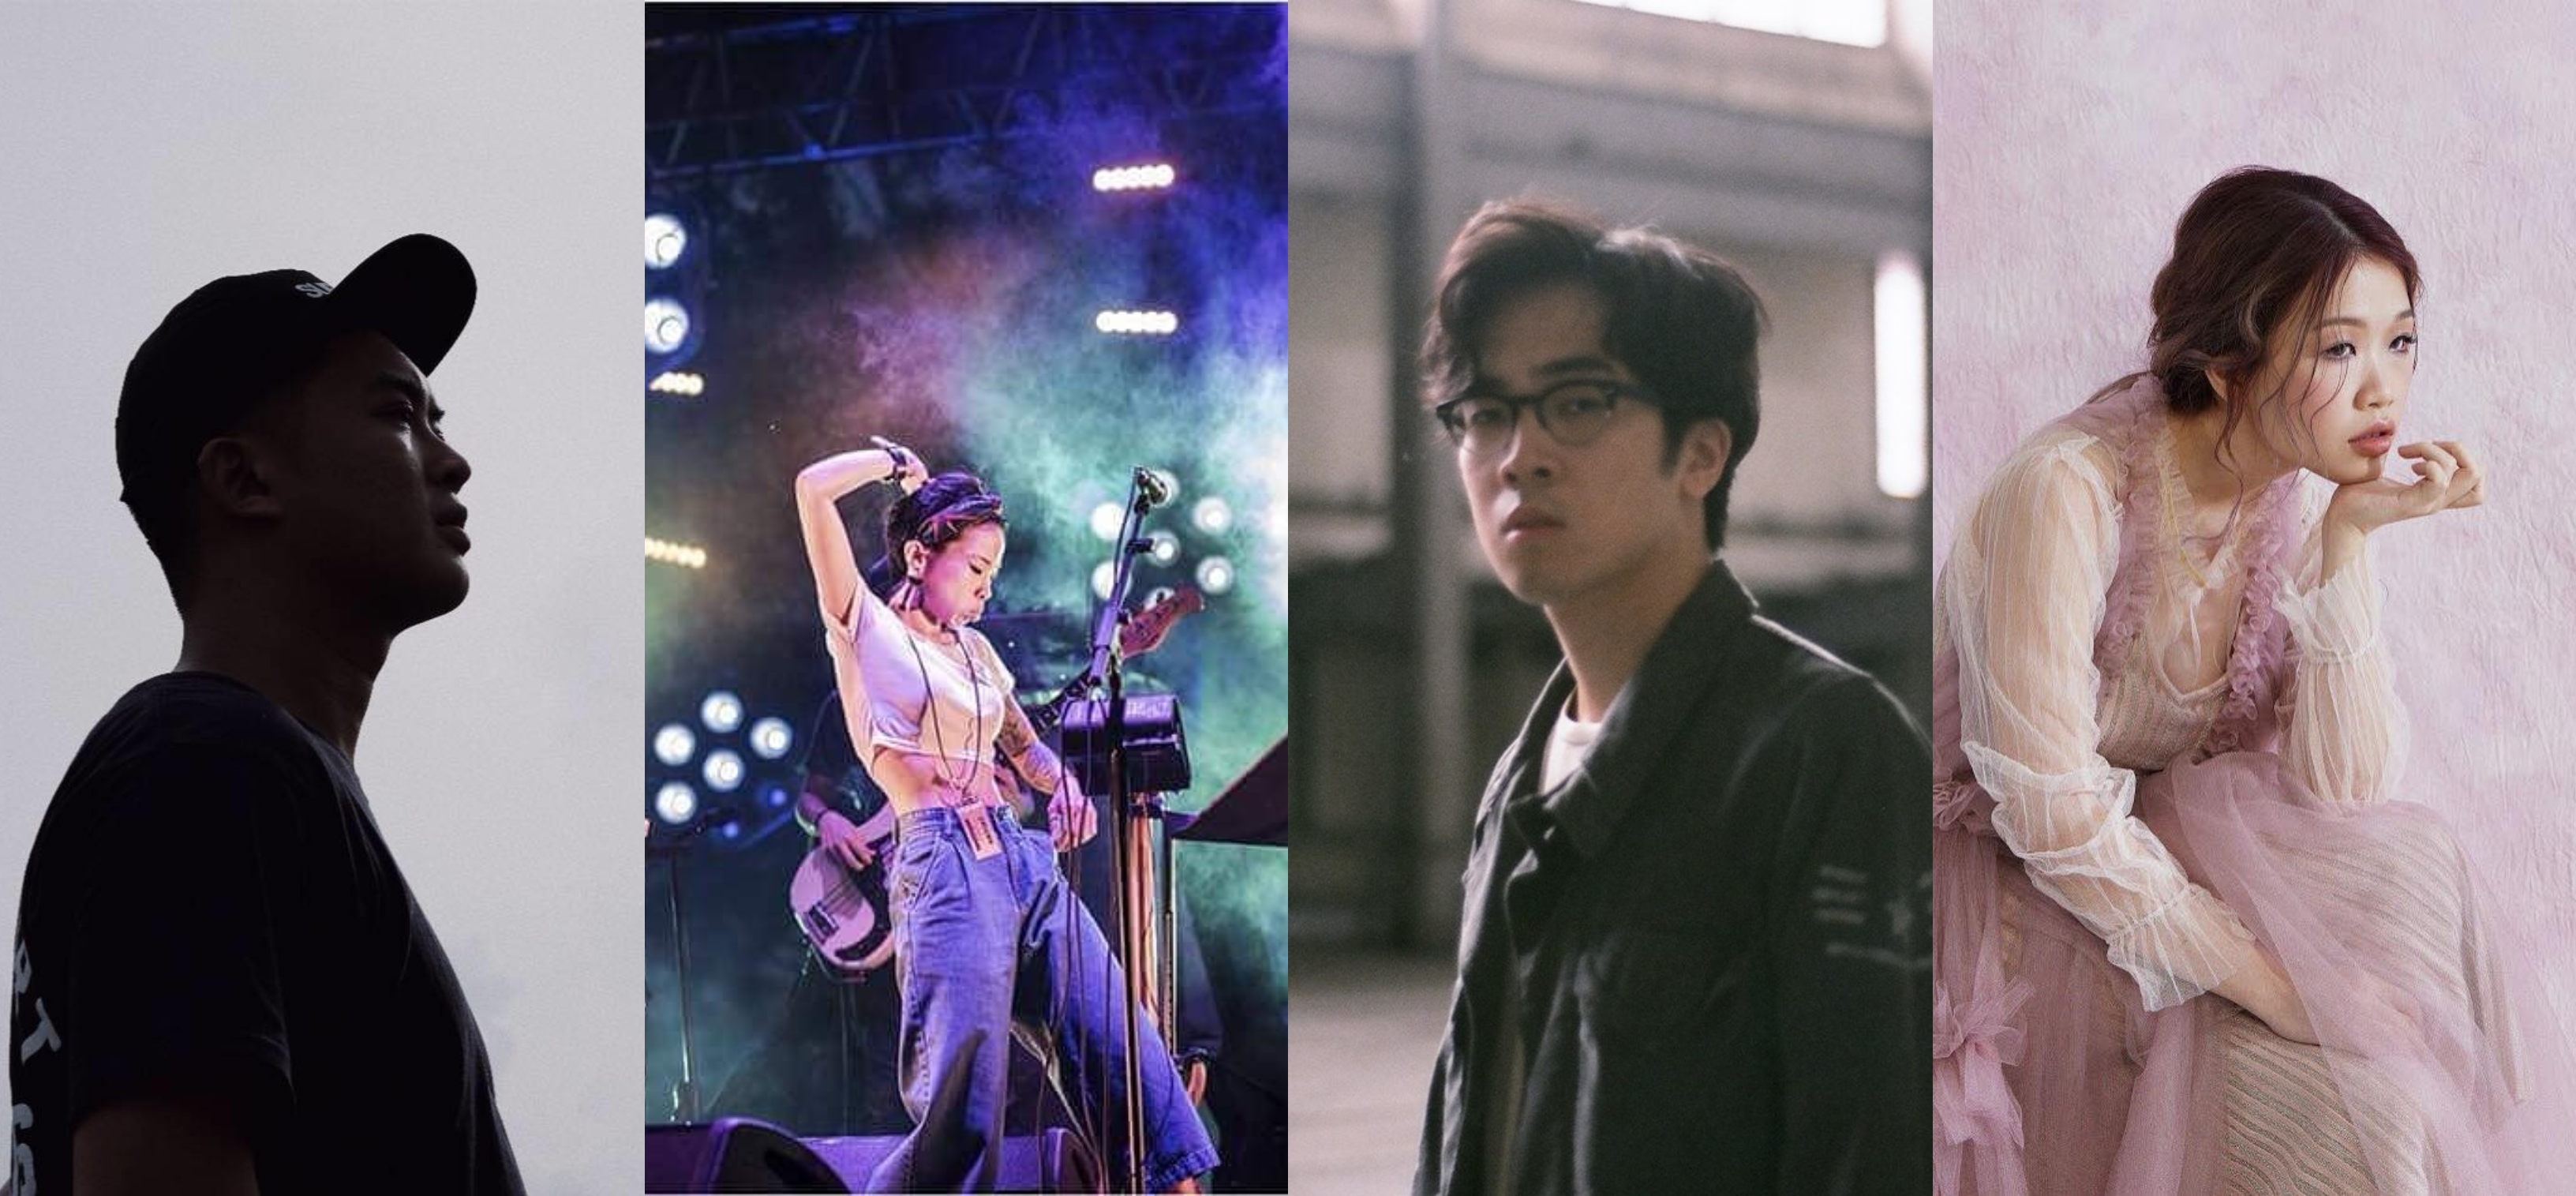 Hear65 announce the four acts going straight from Singapore to BIGSOUND